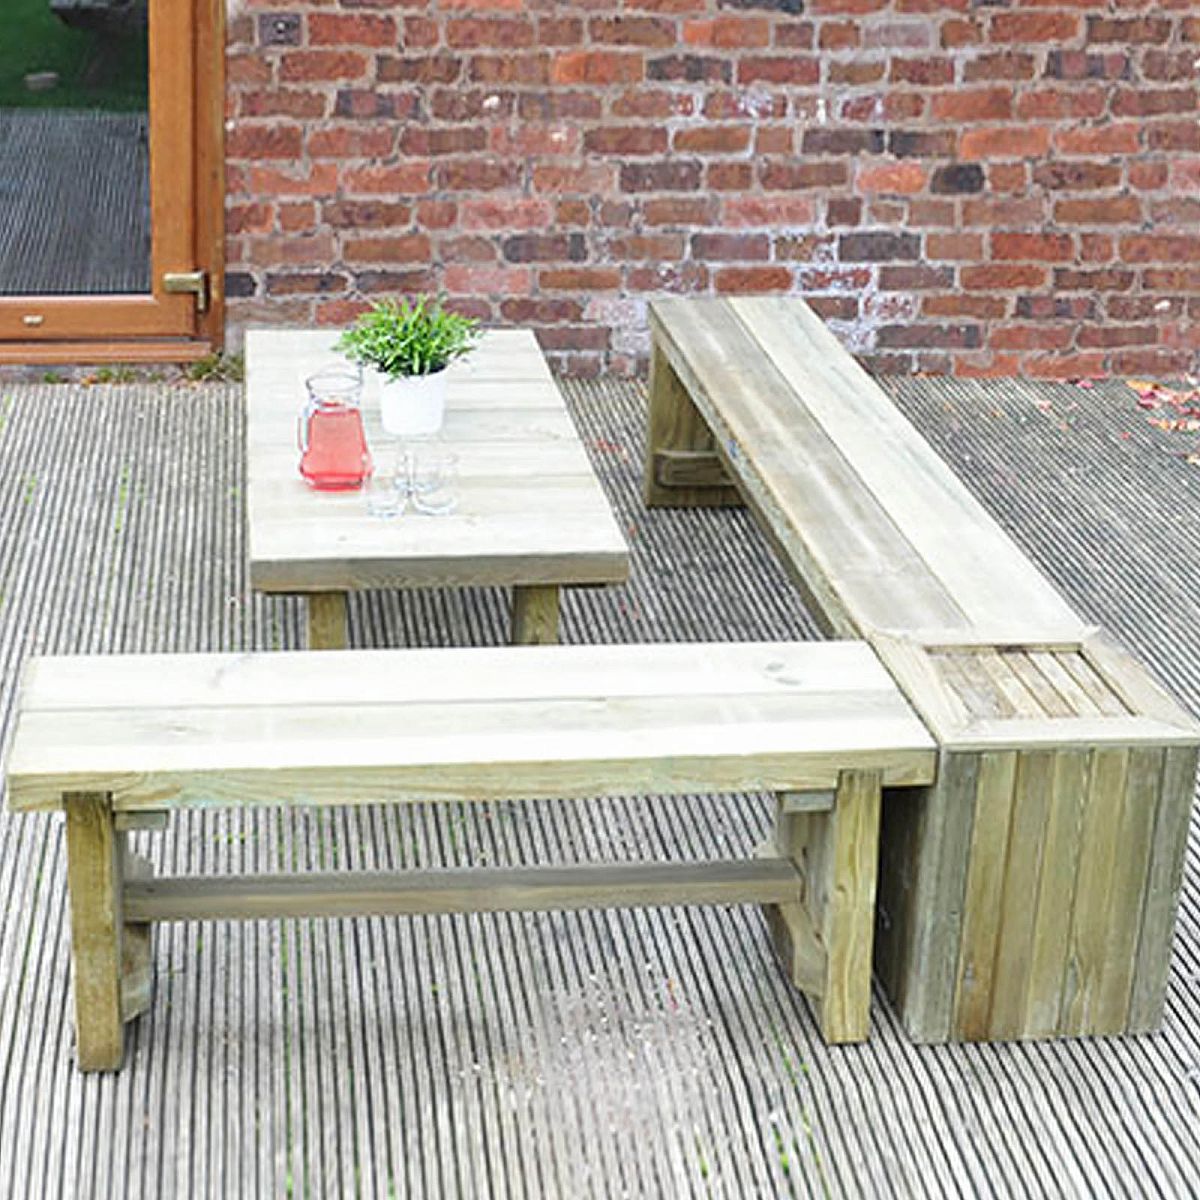 Outdoor Wooden Low Level Sleeper Table by Forest Garden